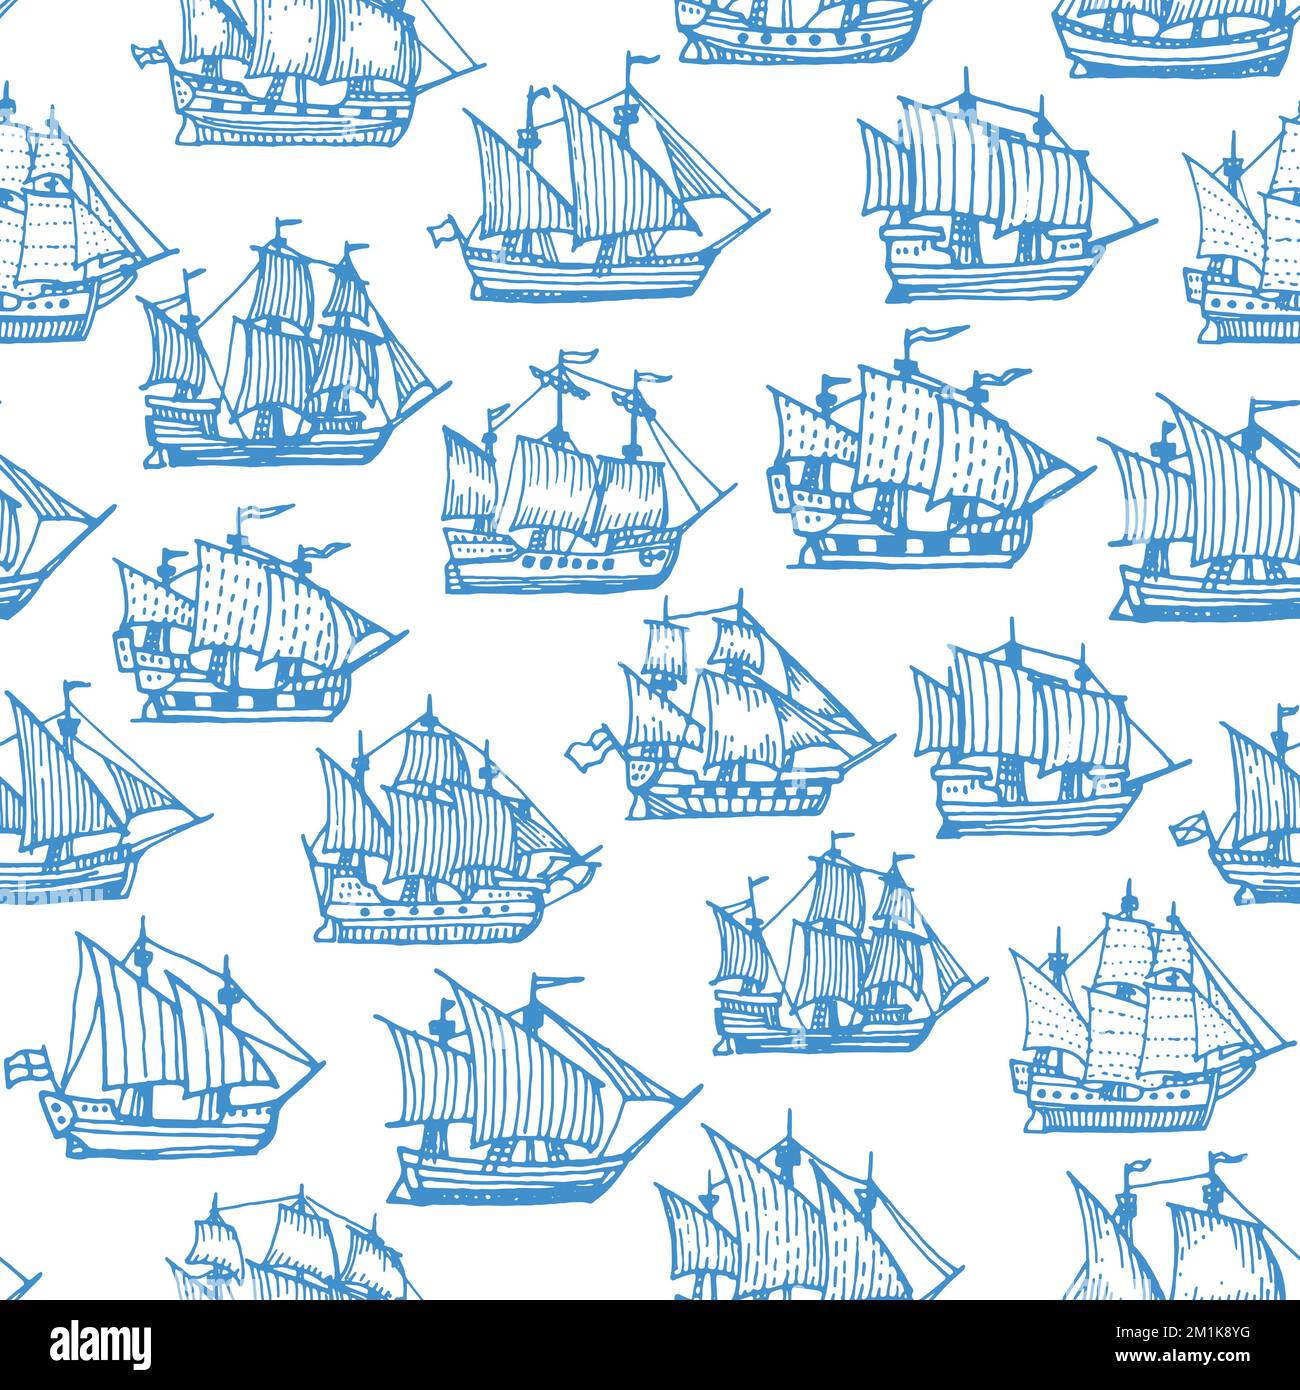 Sail ship, corvette, frigate and brigantine seamless pattern. Vintage vector sketch ornament with nautical boats with flags. Sea vessels, engraved blue galleons on white background, tile, wallpaper Stock Vector